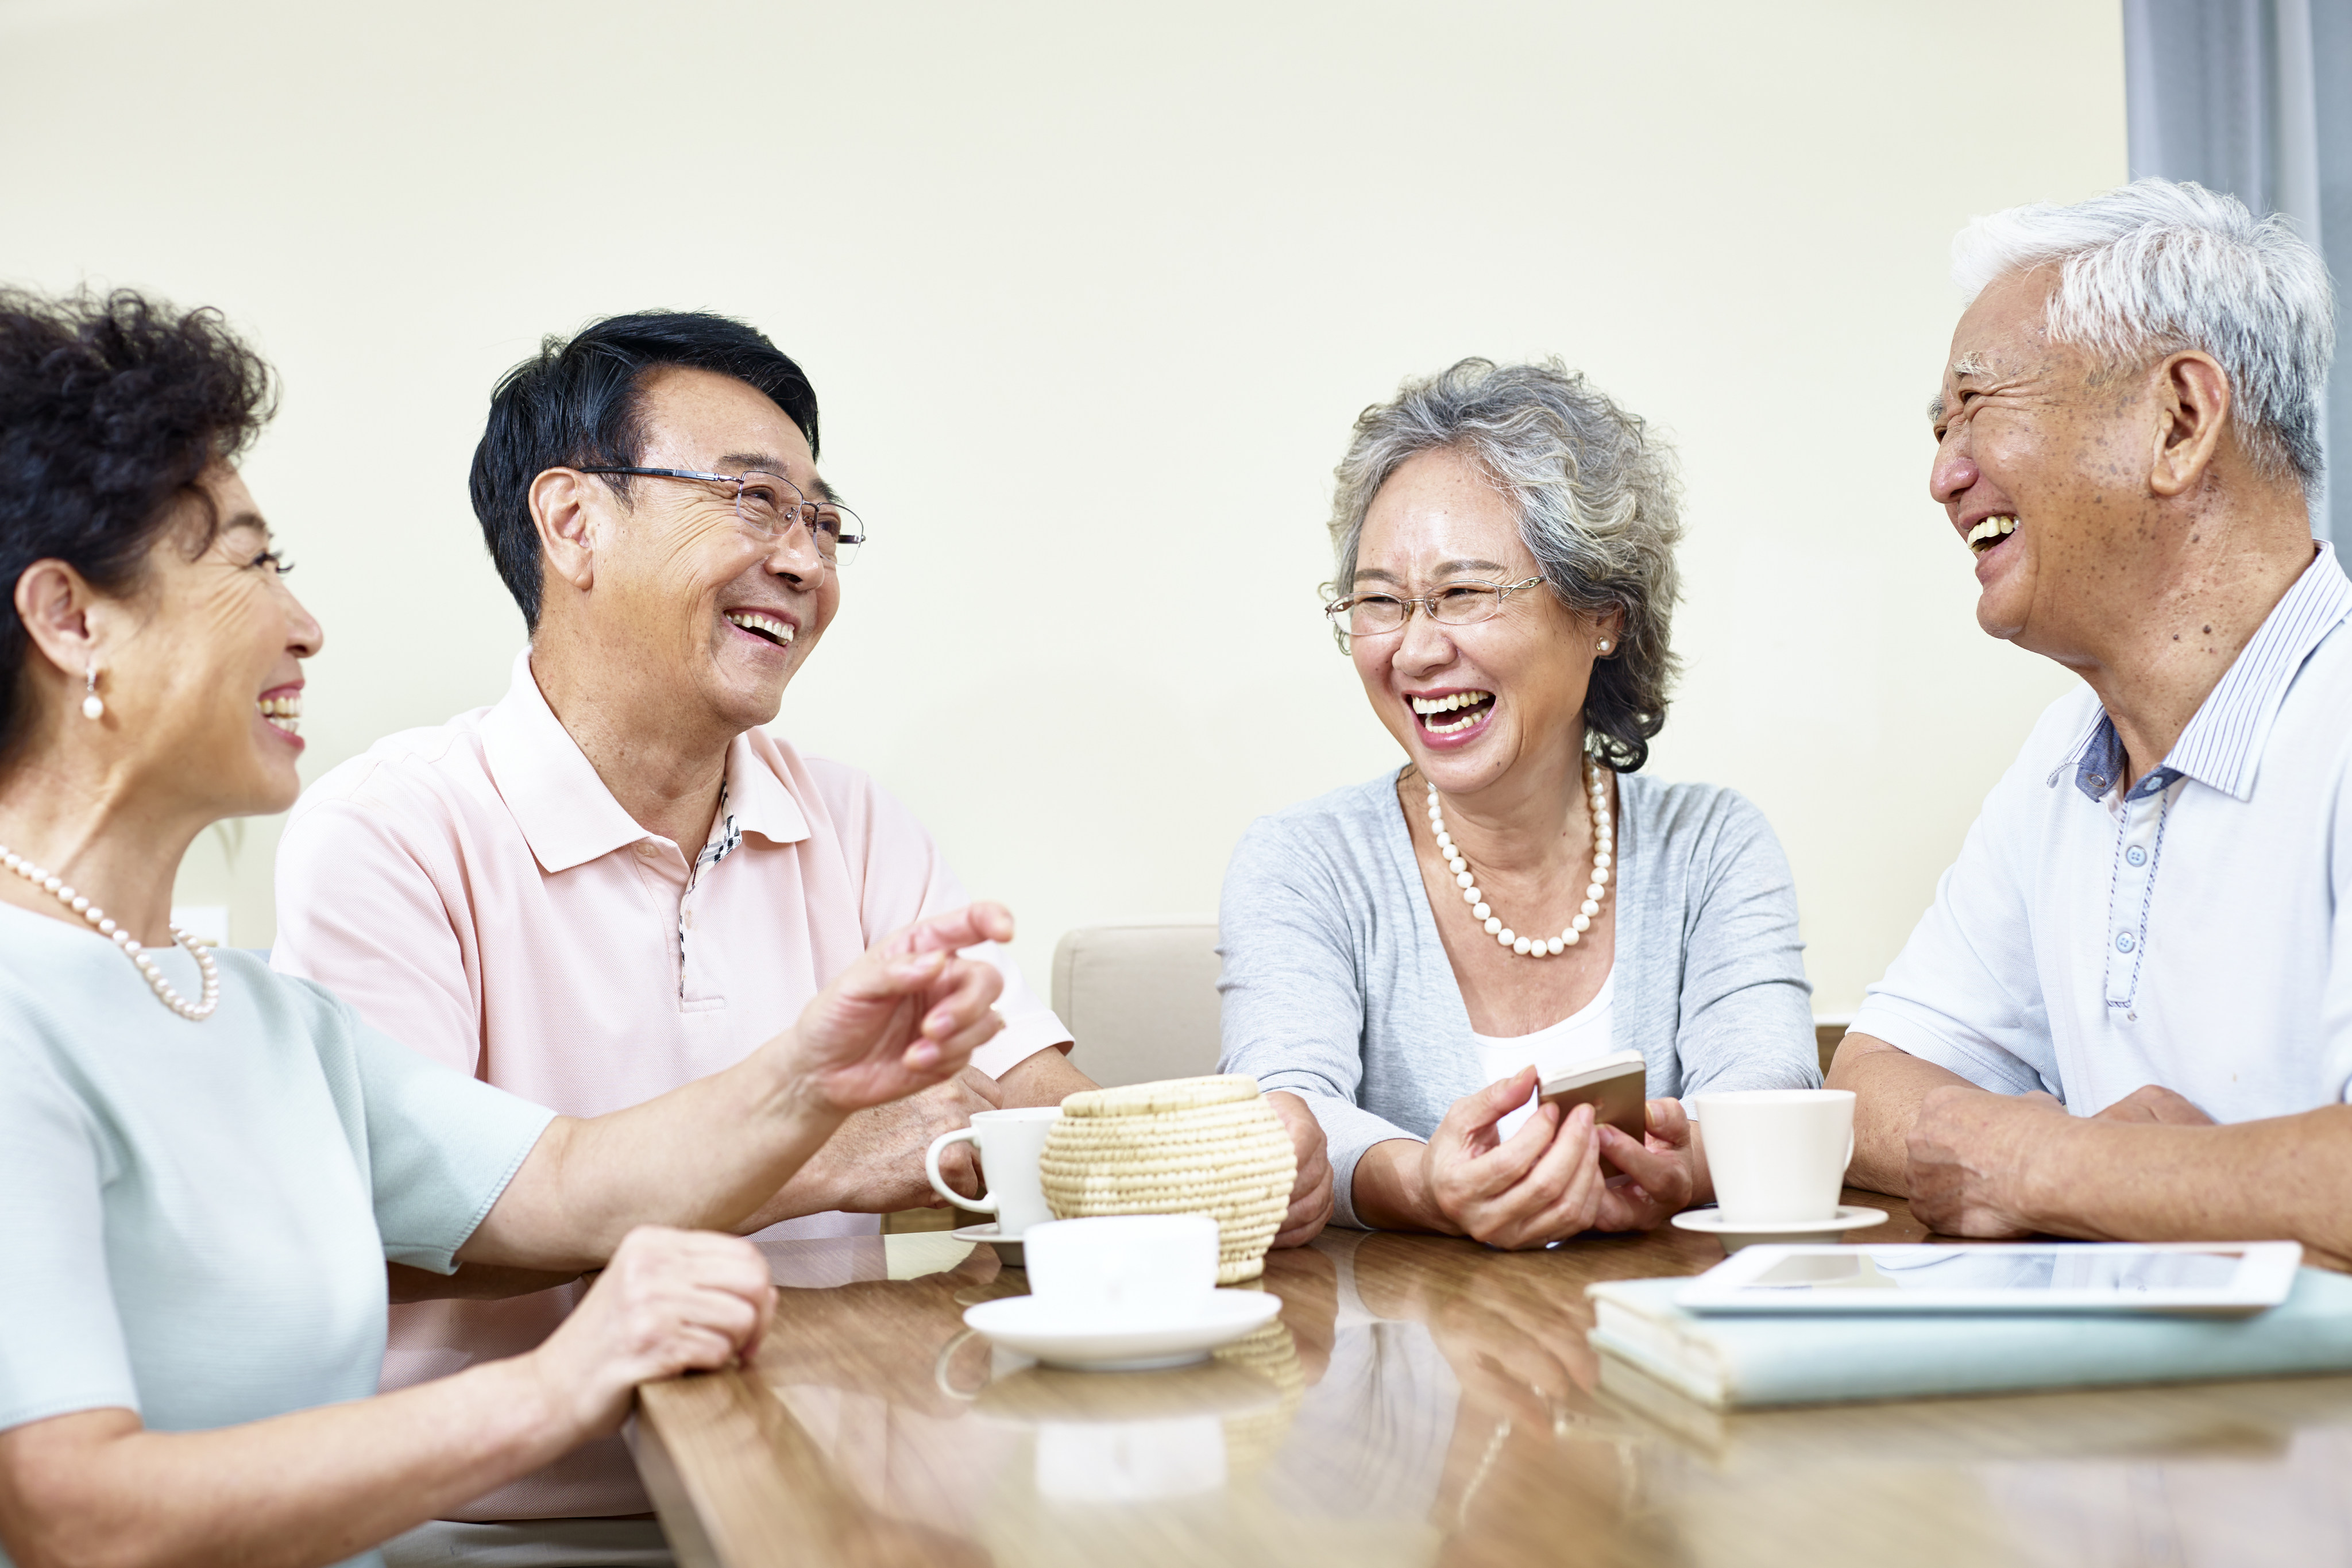 Social interaction, moderate-intensity exercise, and playing games such as mahjong to keep the brain active are key to cognitive health, a study that involved 19,000 elderly Chinese adults shows. Photo: Shutterstock